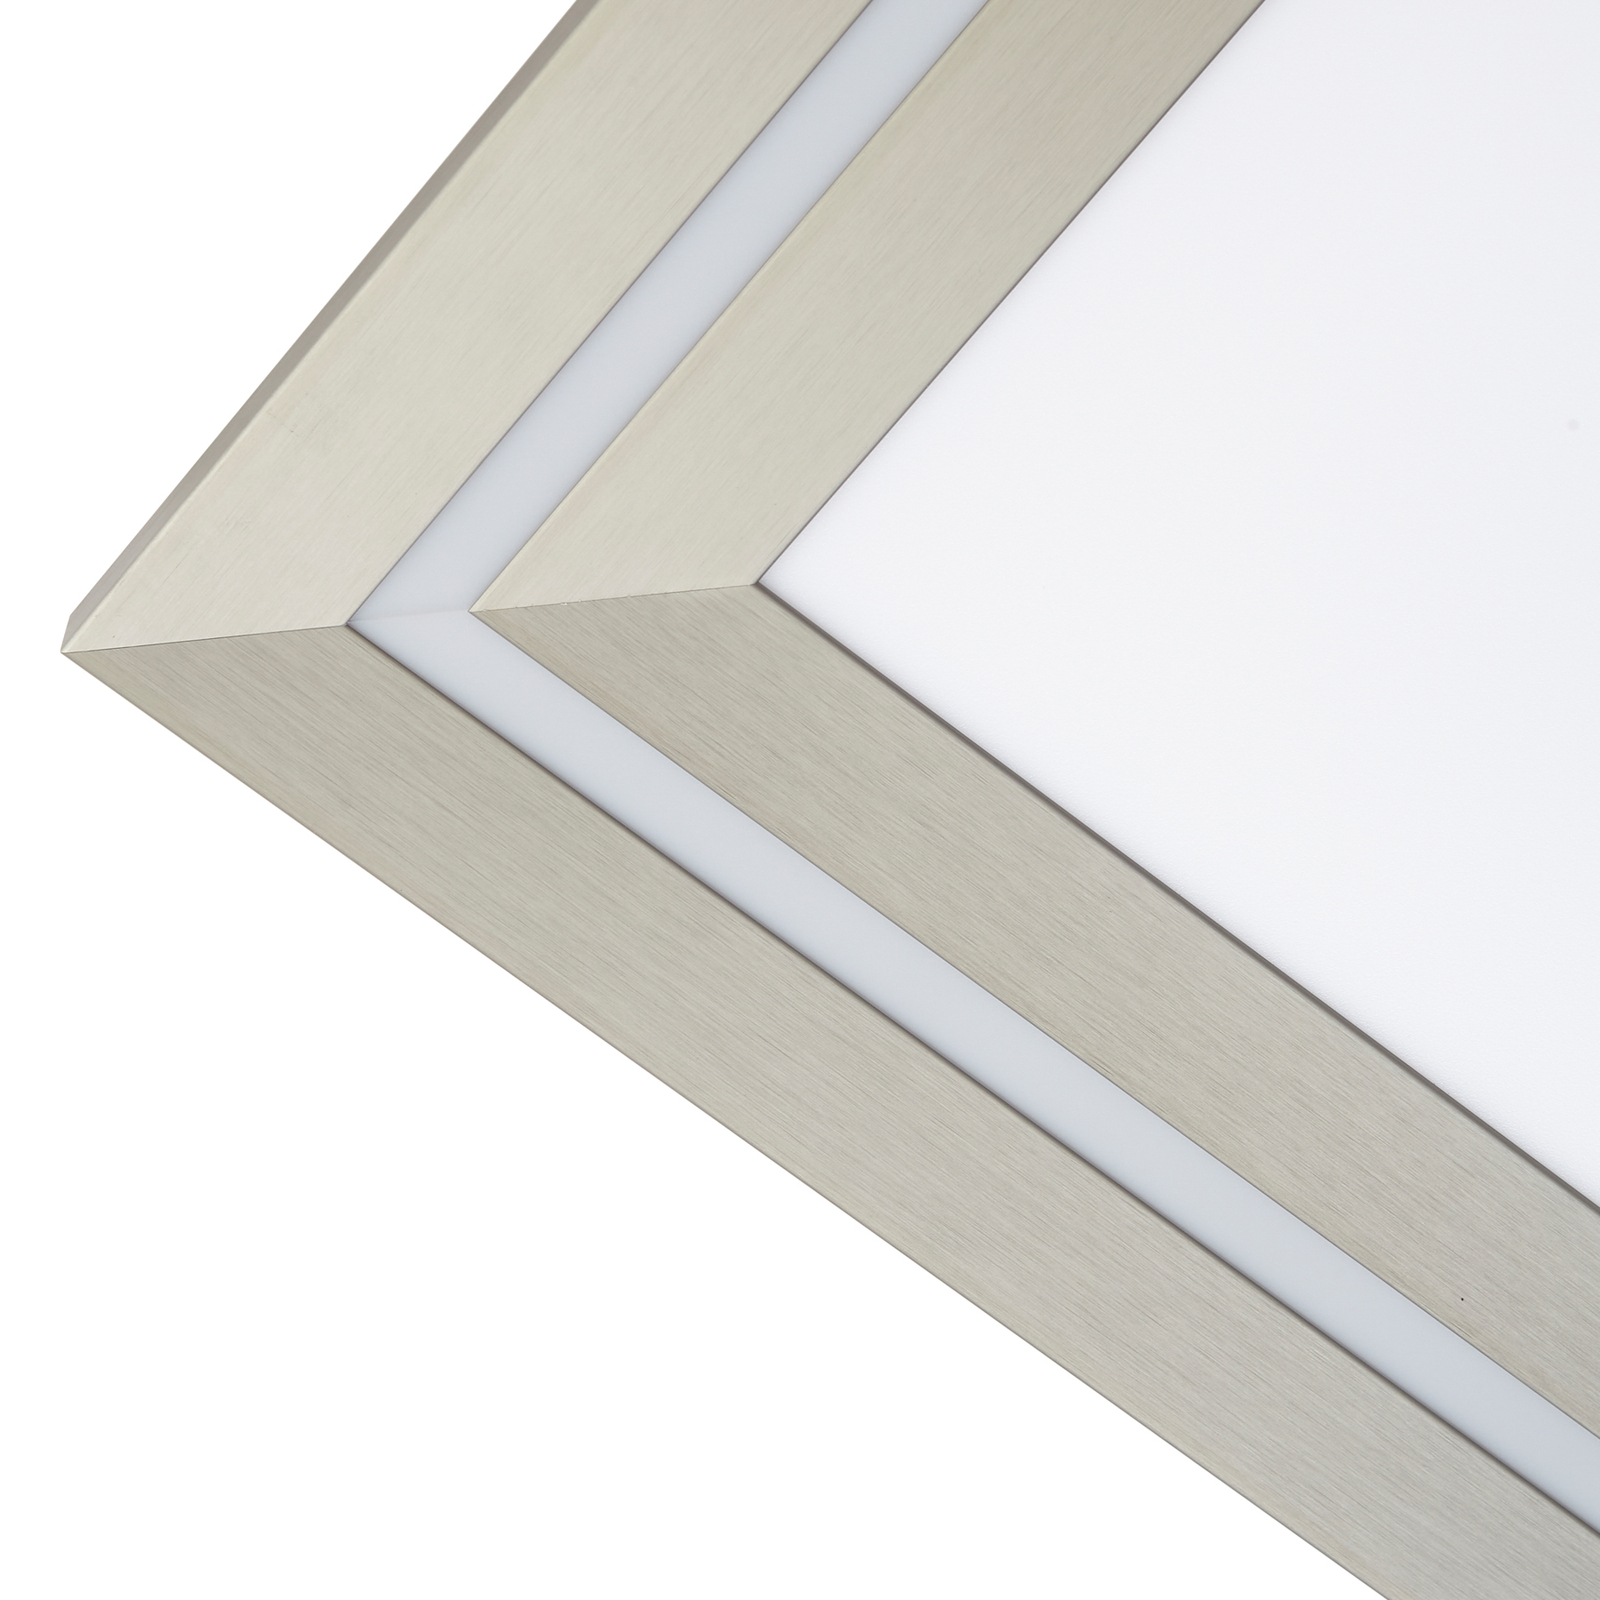 Lucande LED ceiling lamp Leicy, nickel, 80 cm, RGBIC, CCT